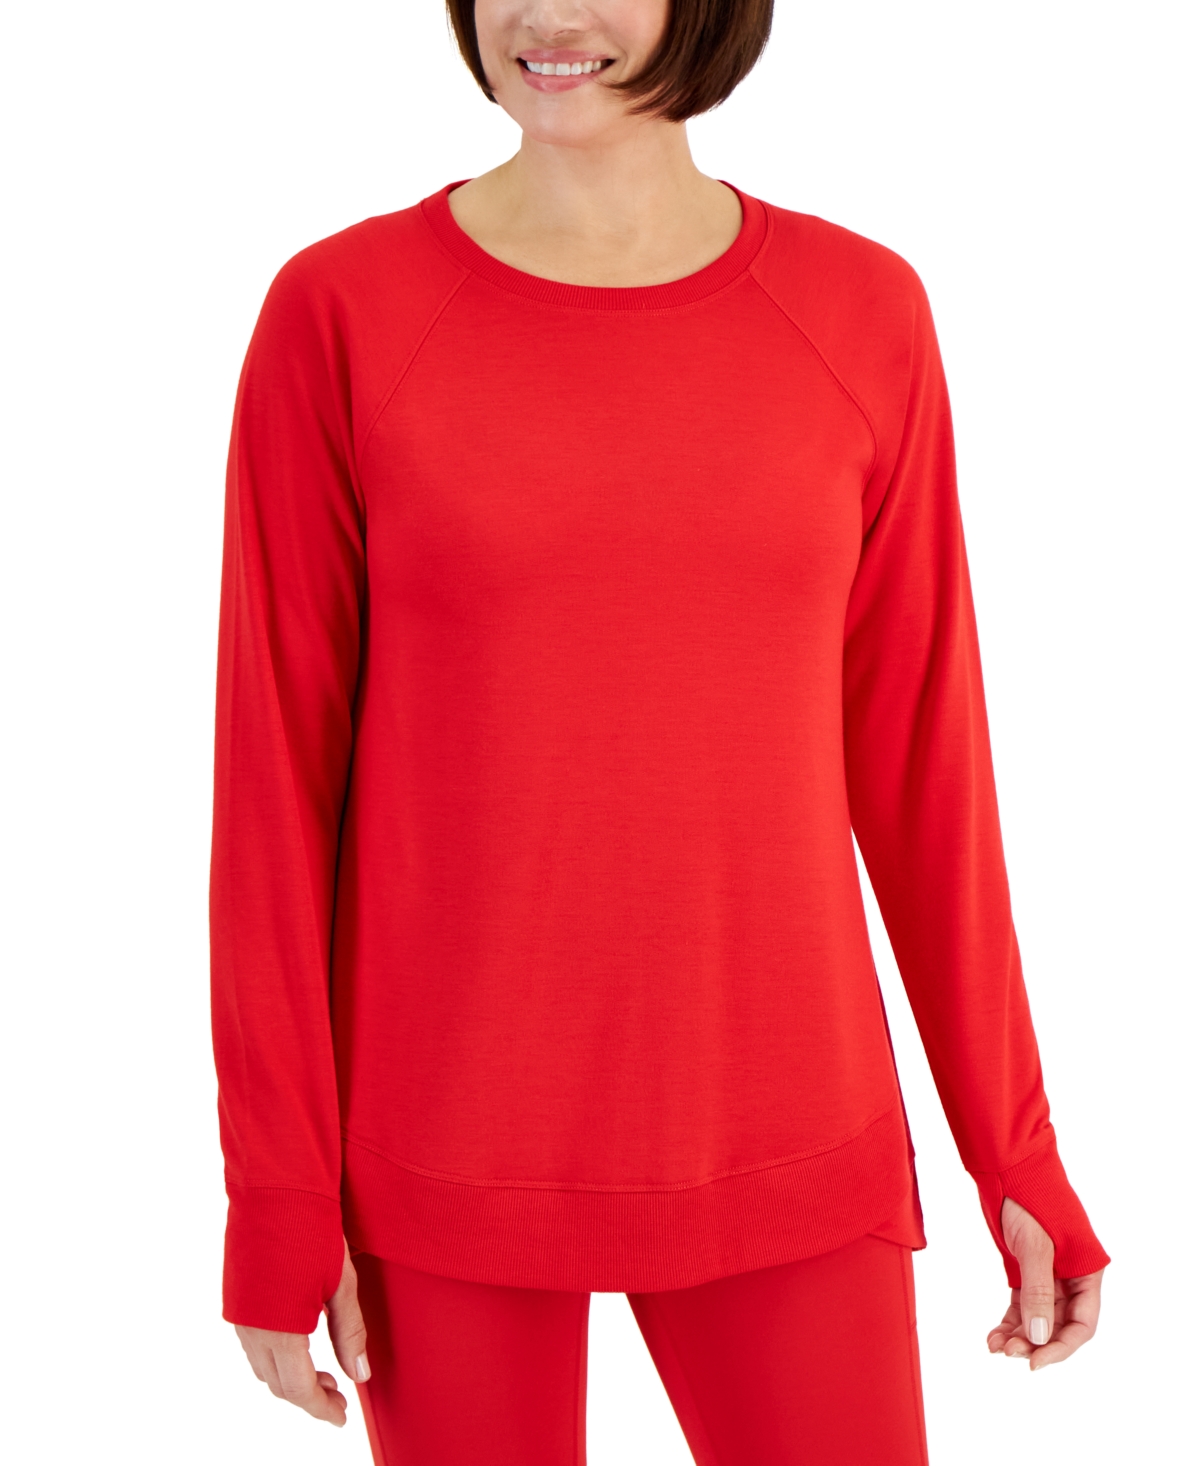 Women's Active Butter French-Terry Long-Sleeve Thumbhole Tunic Top, Created for Macy's - Gumball Red